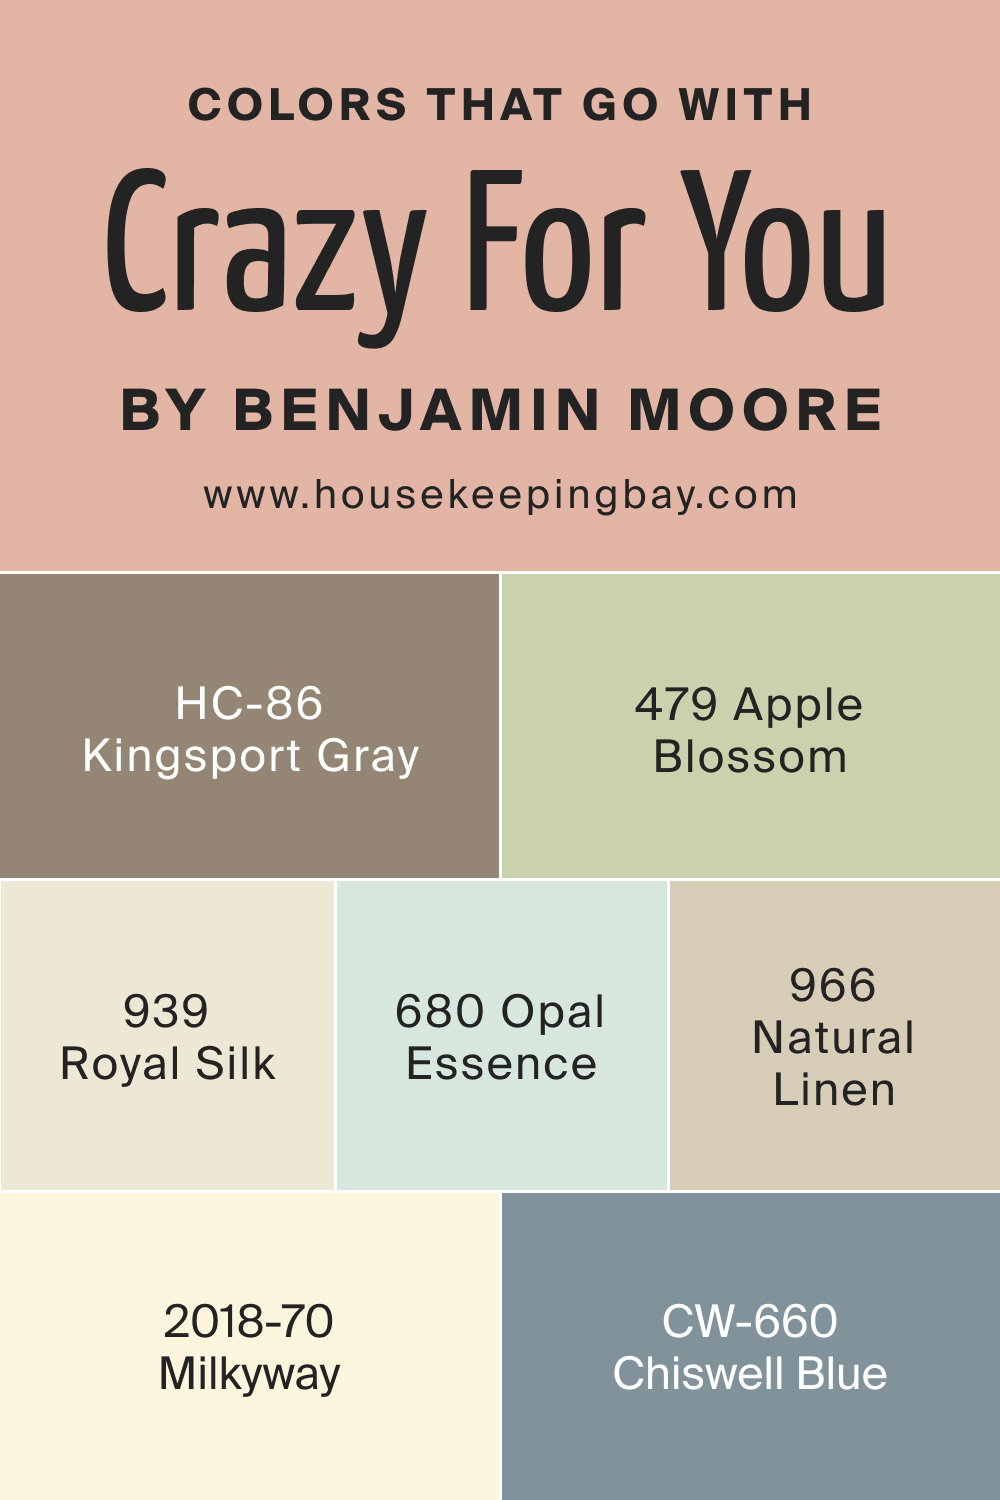 Colors that go with BM Crazy For You 053 by Benjamin Moore